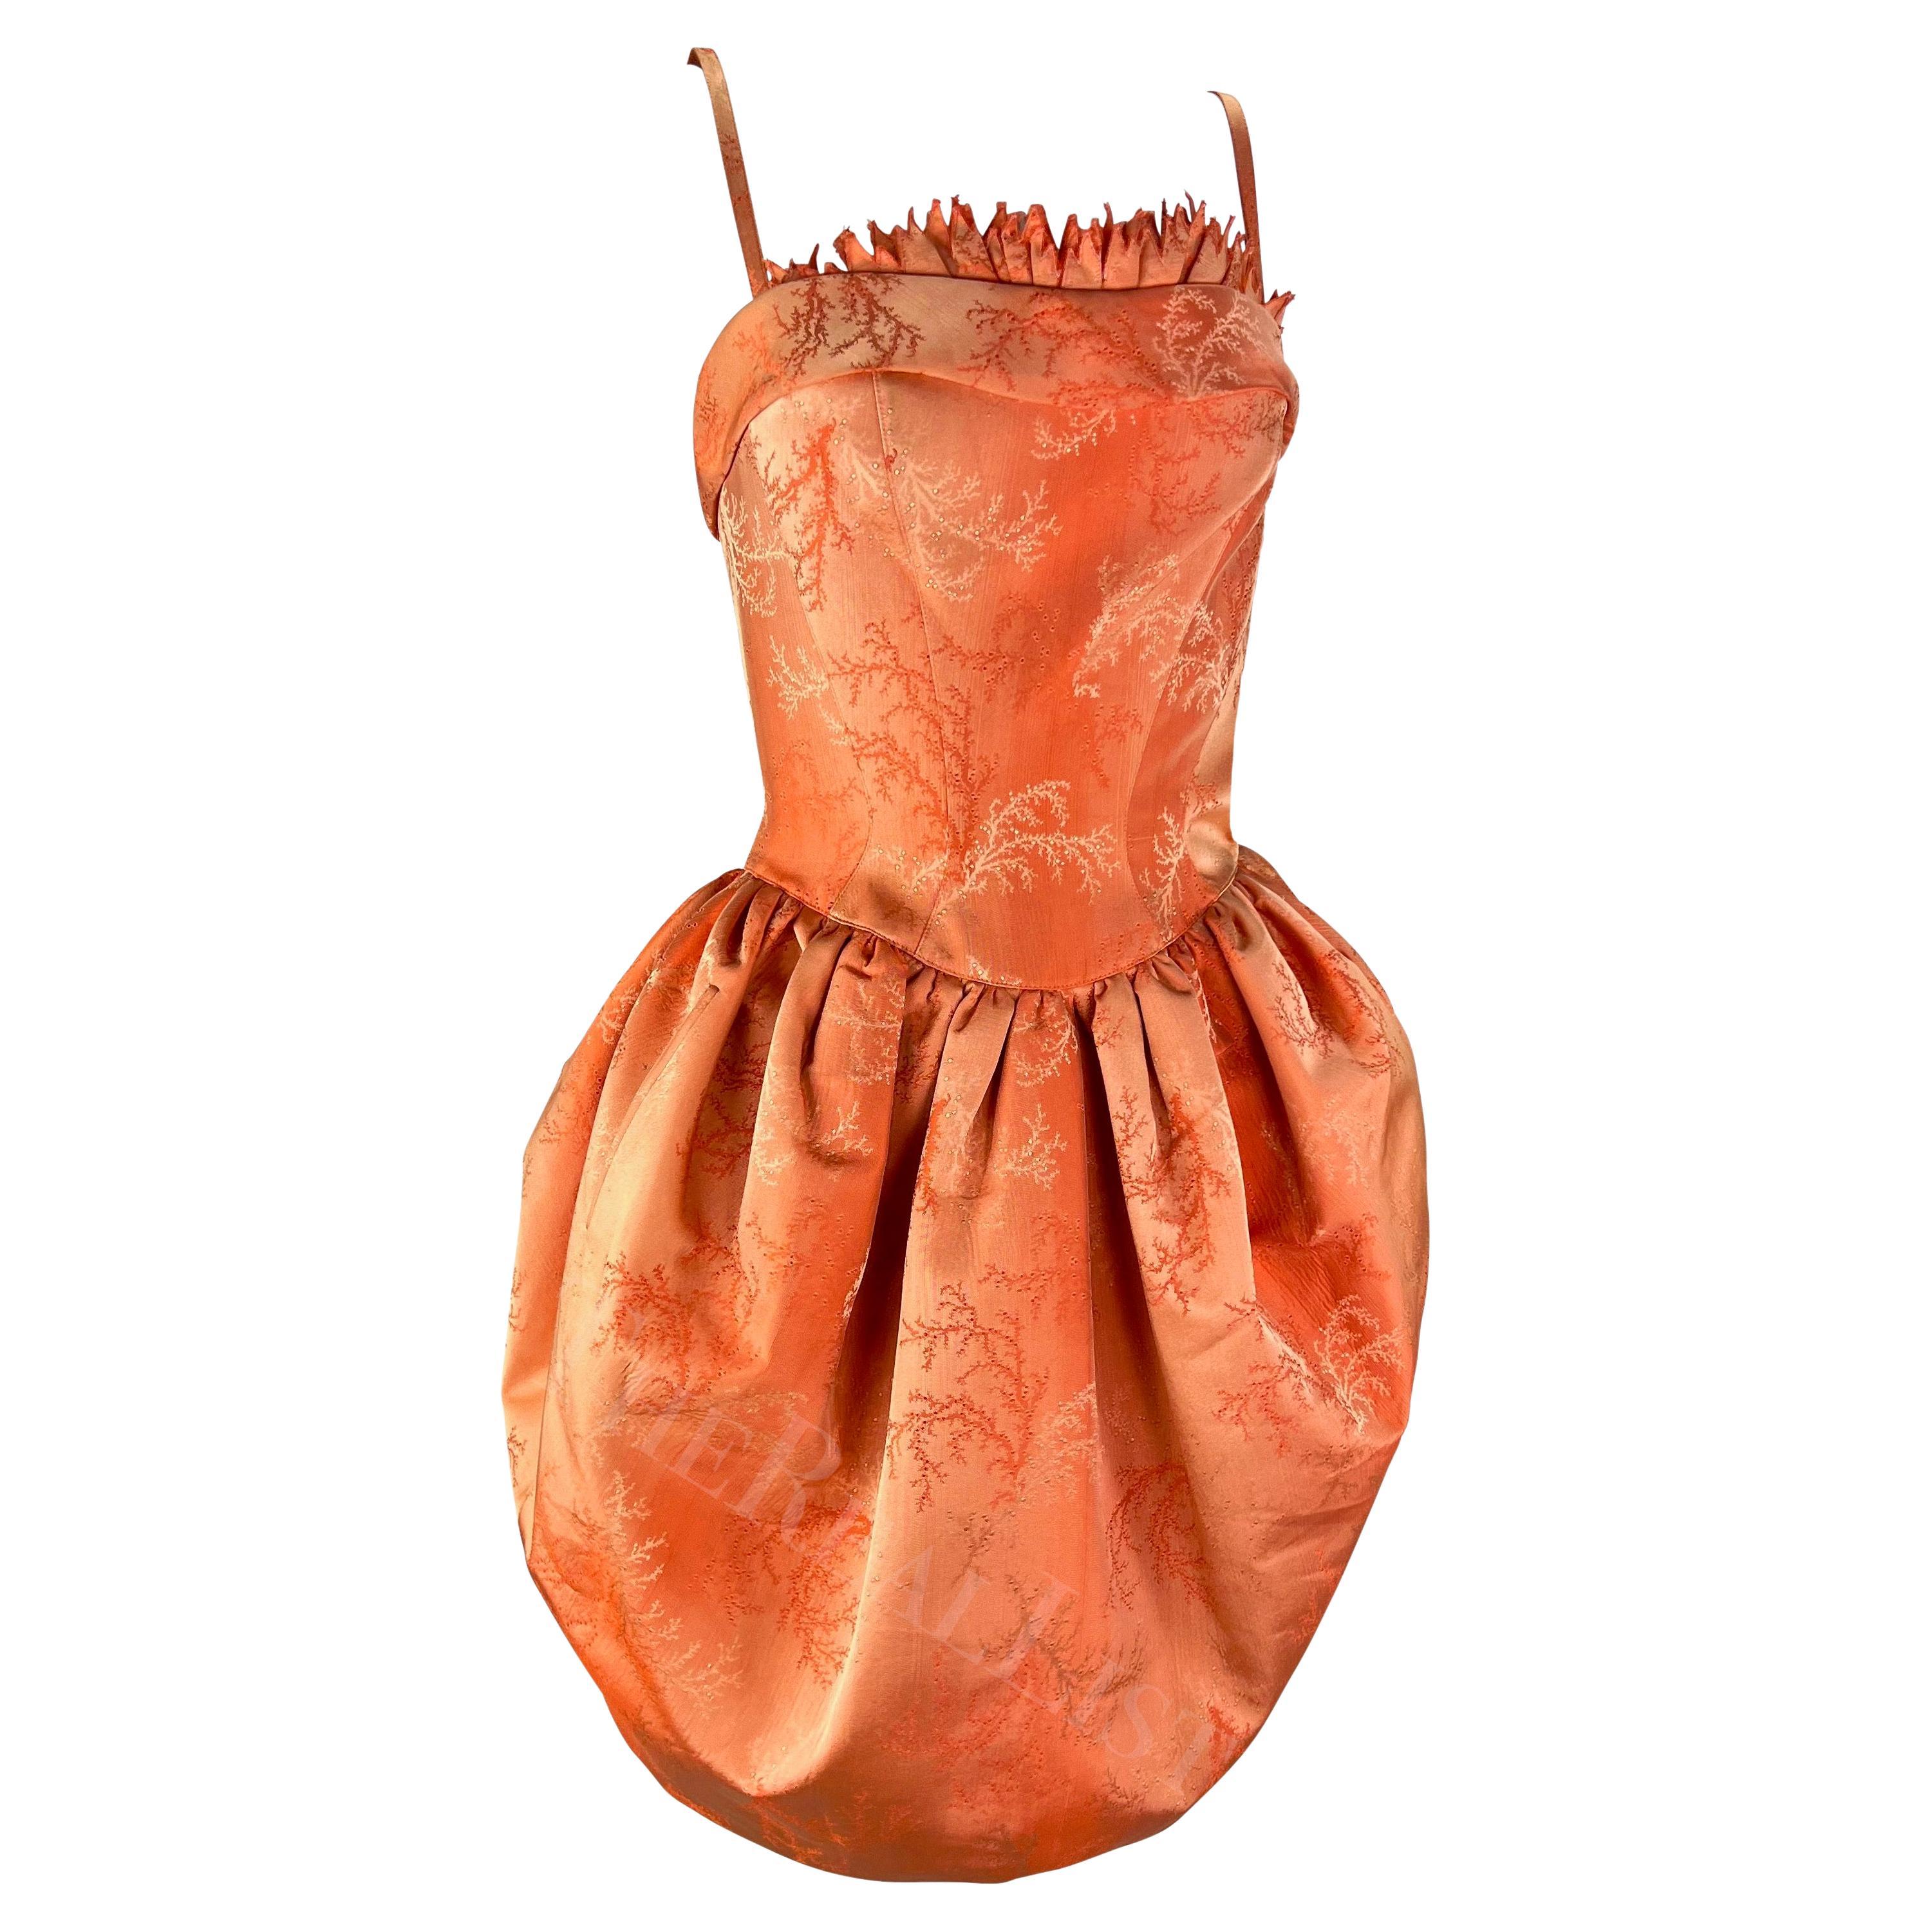 A rare sample from Thierry Mugler's Cruise 1999 collection, this striking coral orange mini dress features a voluminous skirt, fitted top, and spaghetti straps. Covered in a monochrome orange floral jacquard weave, this corseted mini dress is made